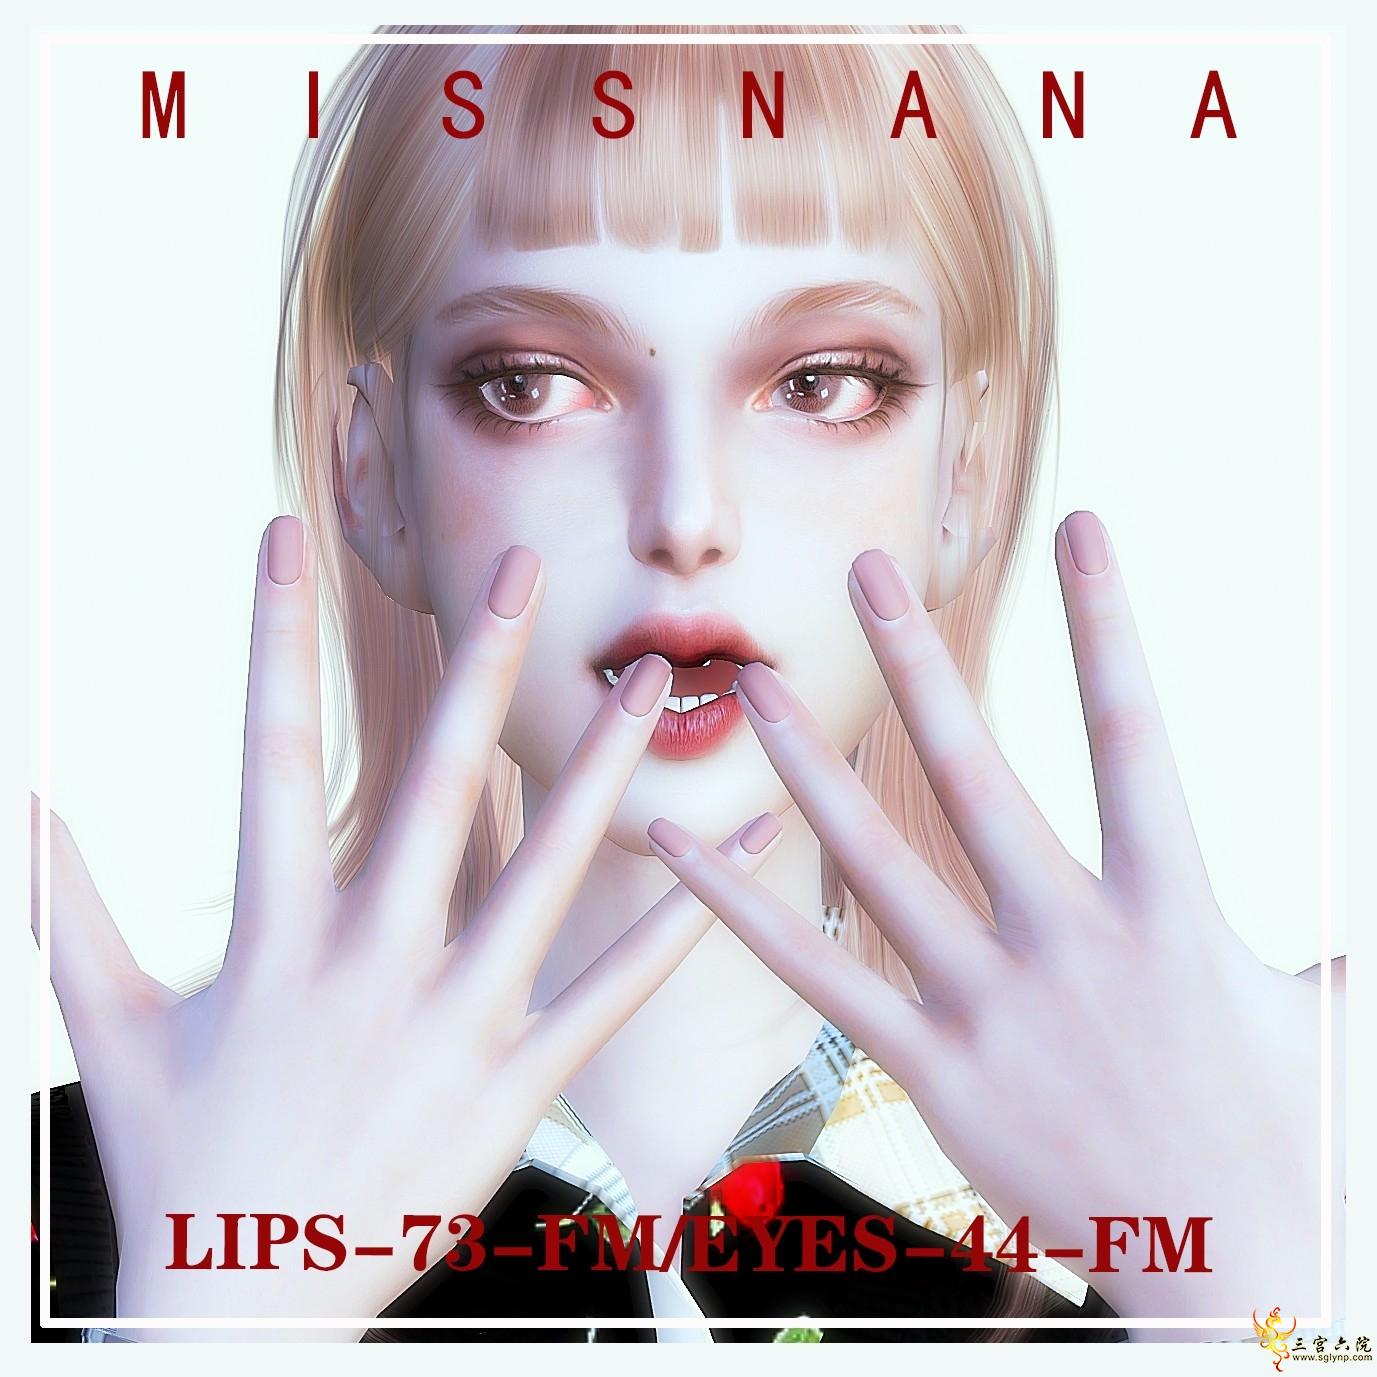 -lips-73.png